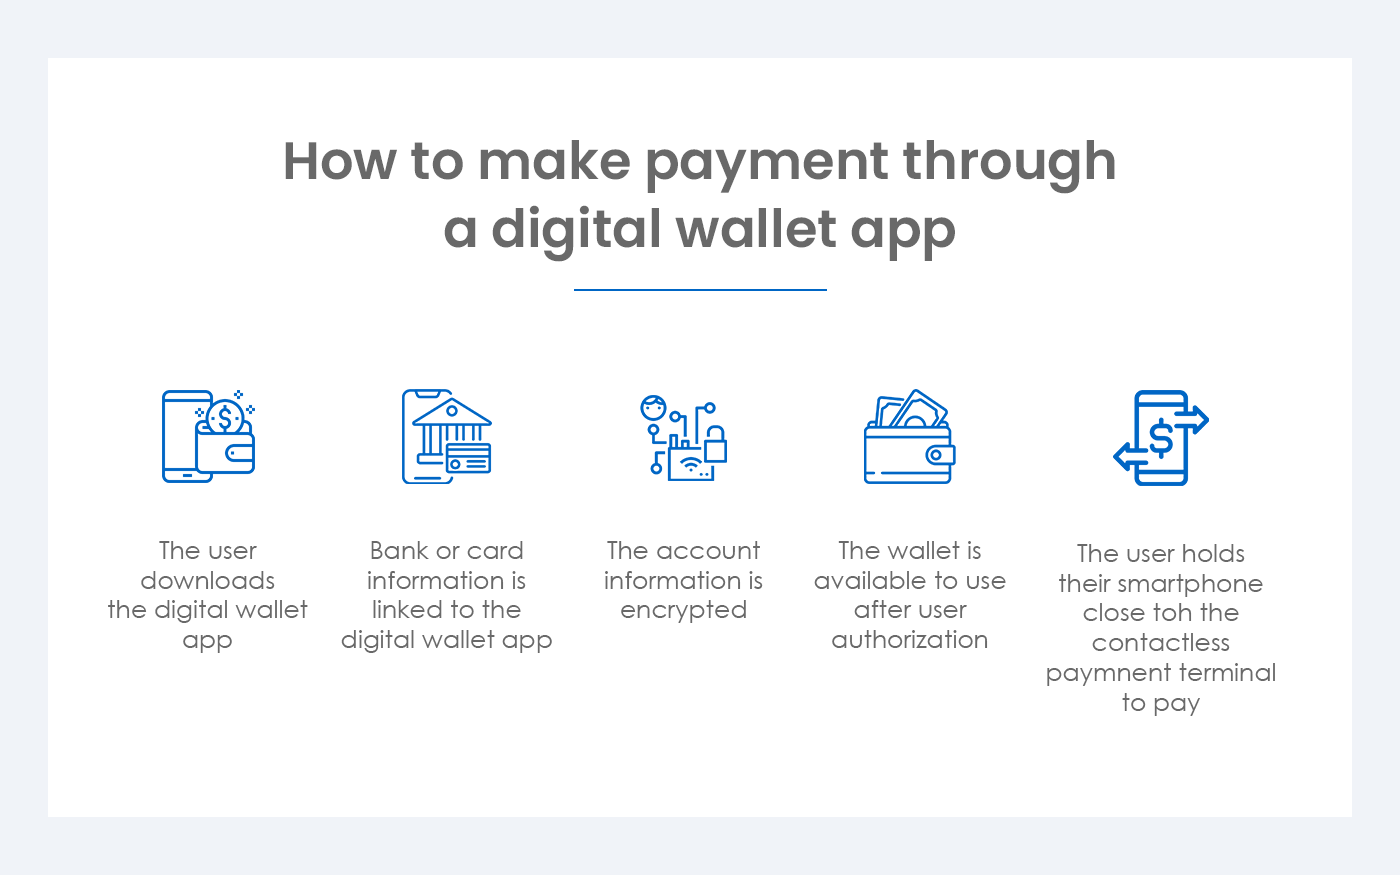 How Do These Digital Wallet Applications Work?